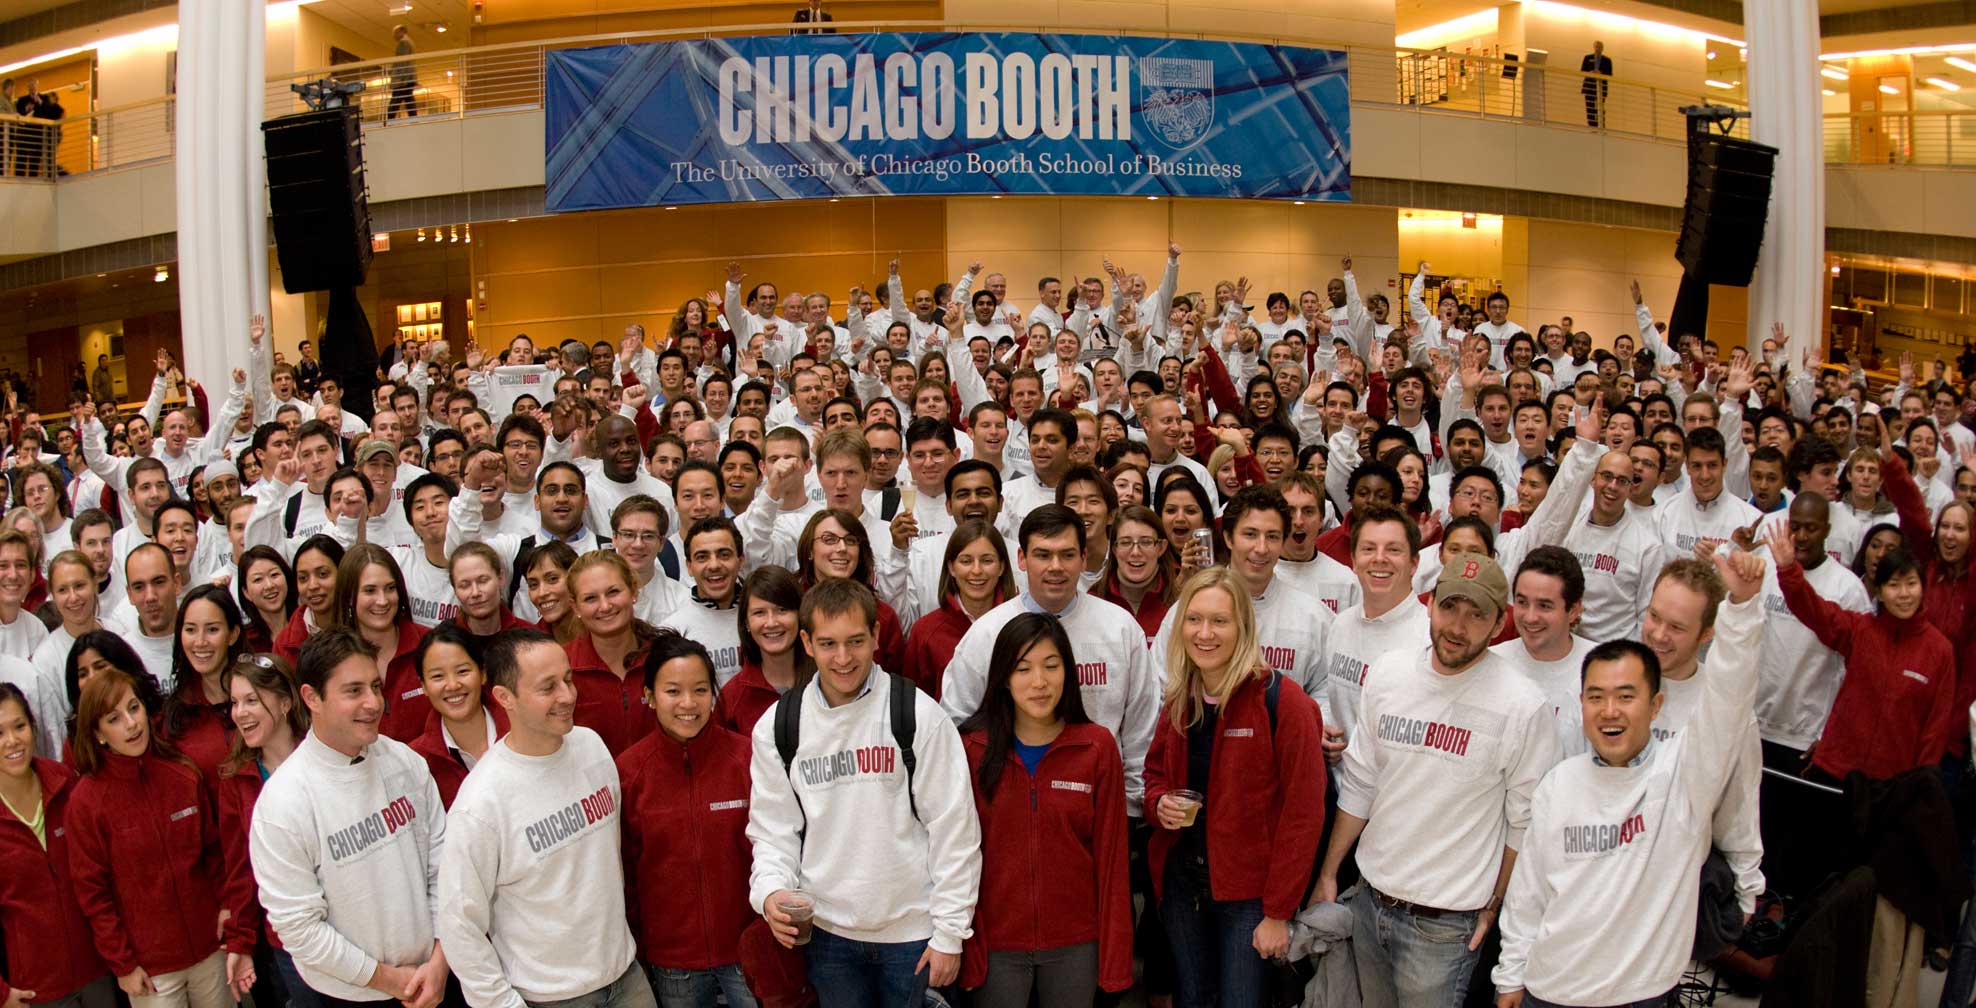 University of Chicago Booth Graduate School of Business, Illinois